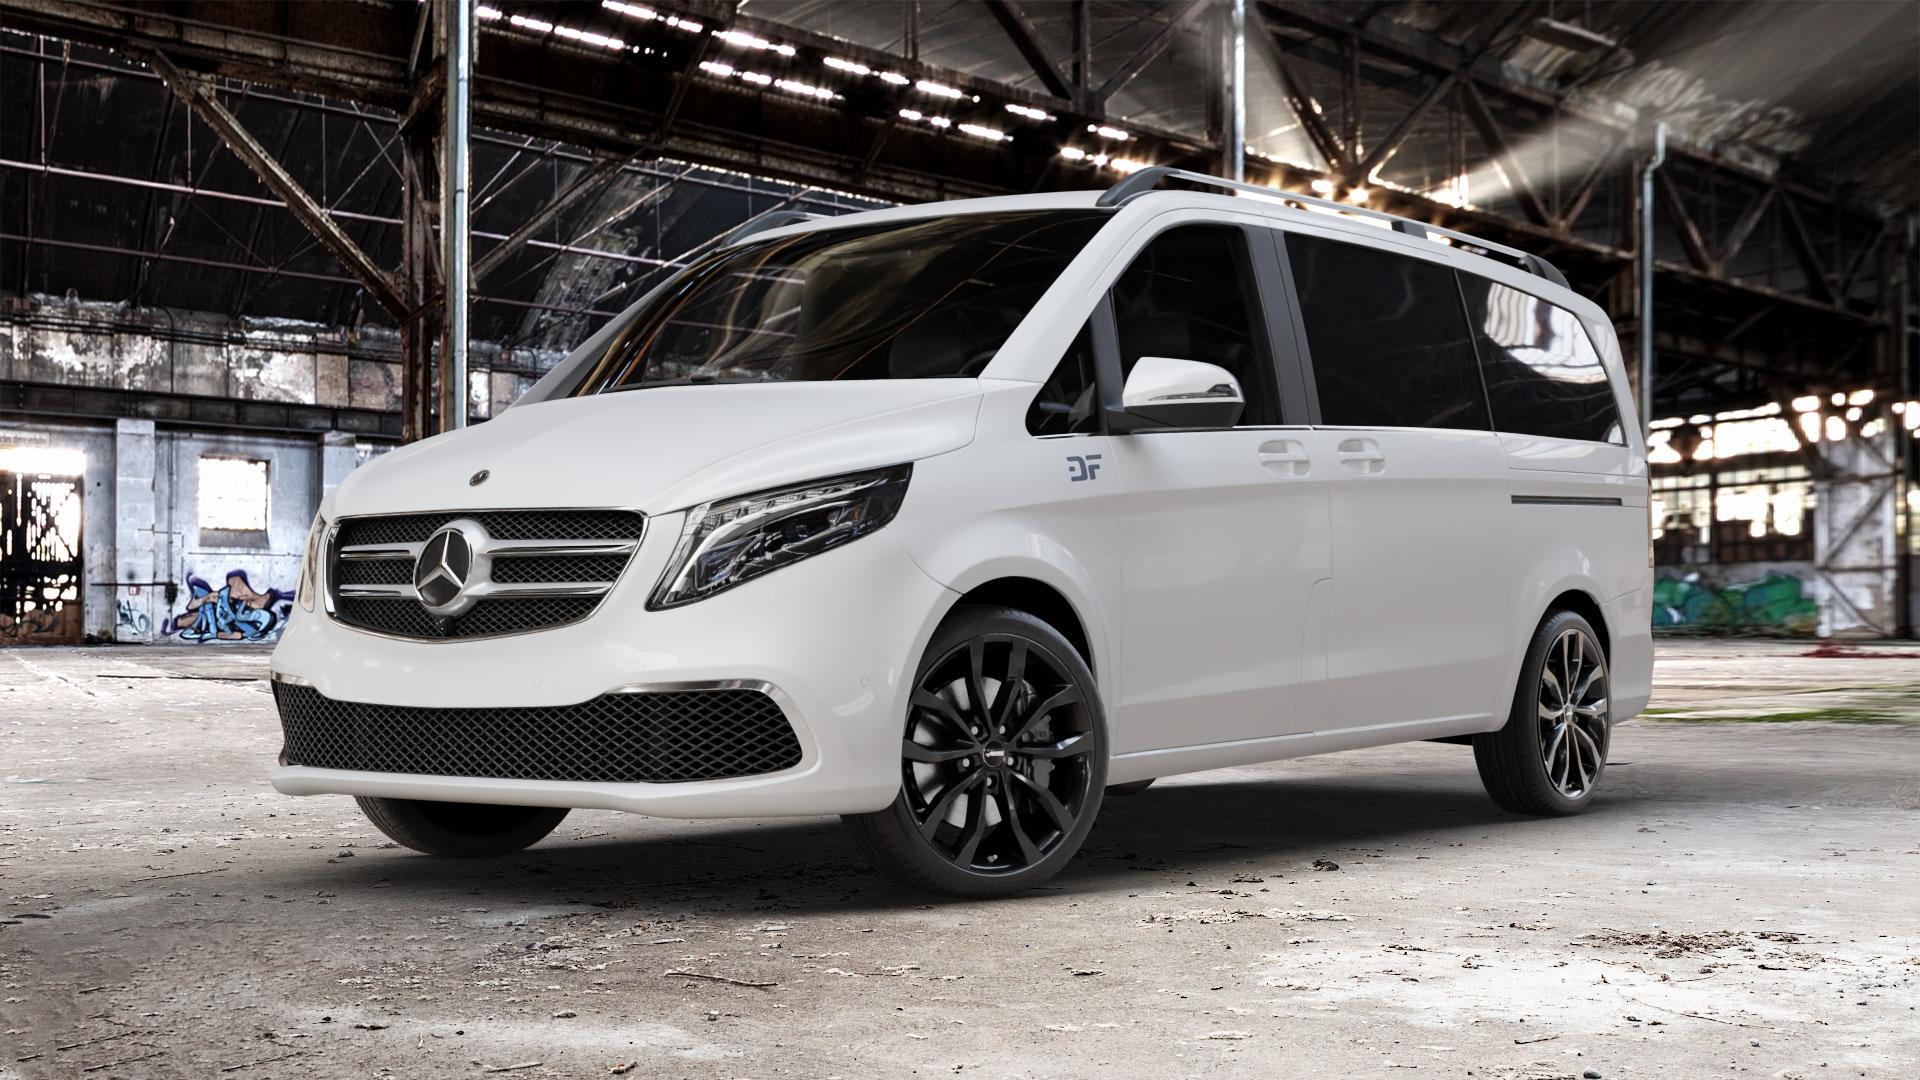 Mercedes Vito Mixto Type W447 Facelift 1,8l 110d 75kW (102 hp) Wheels and  Tyre Packages